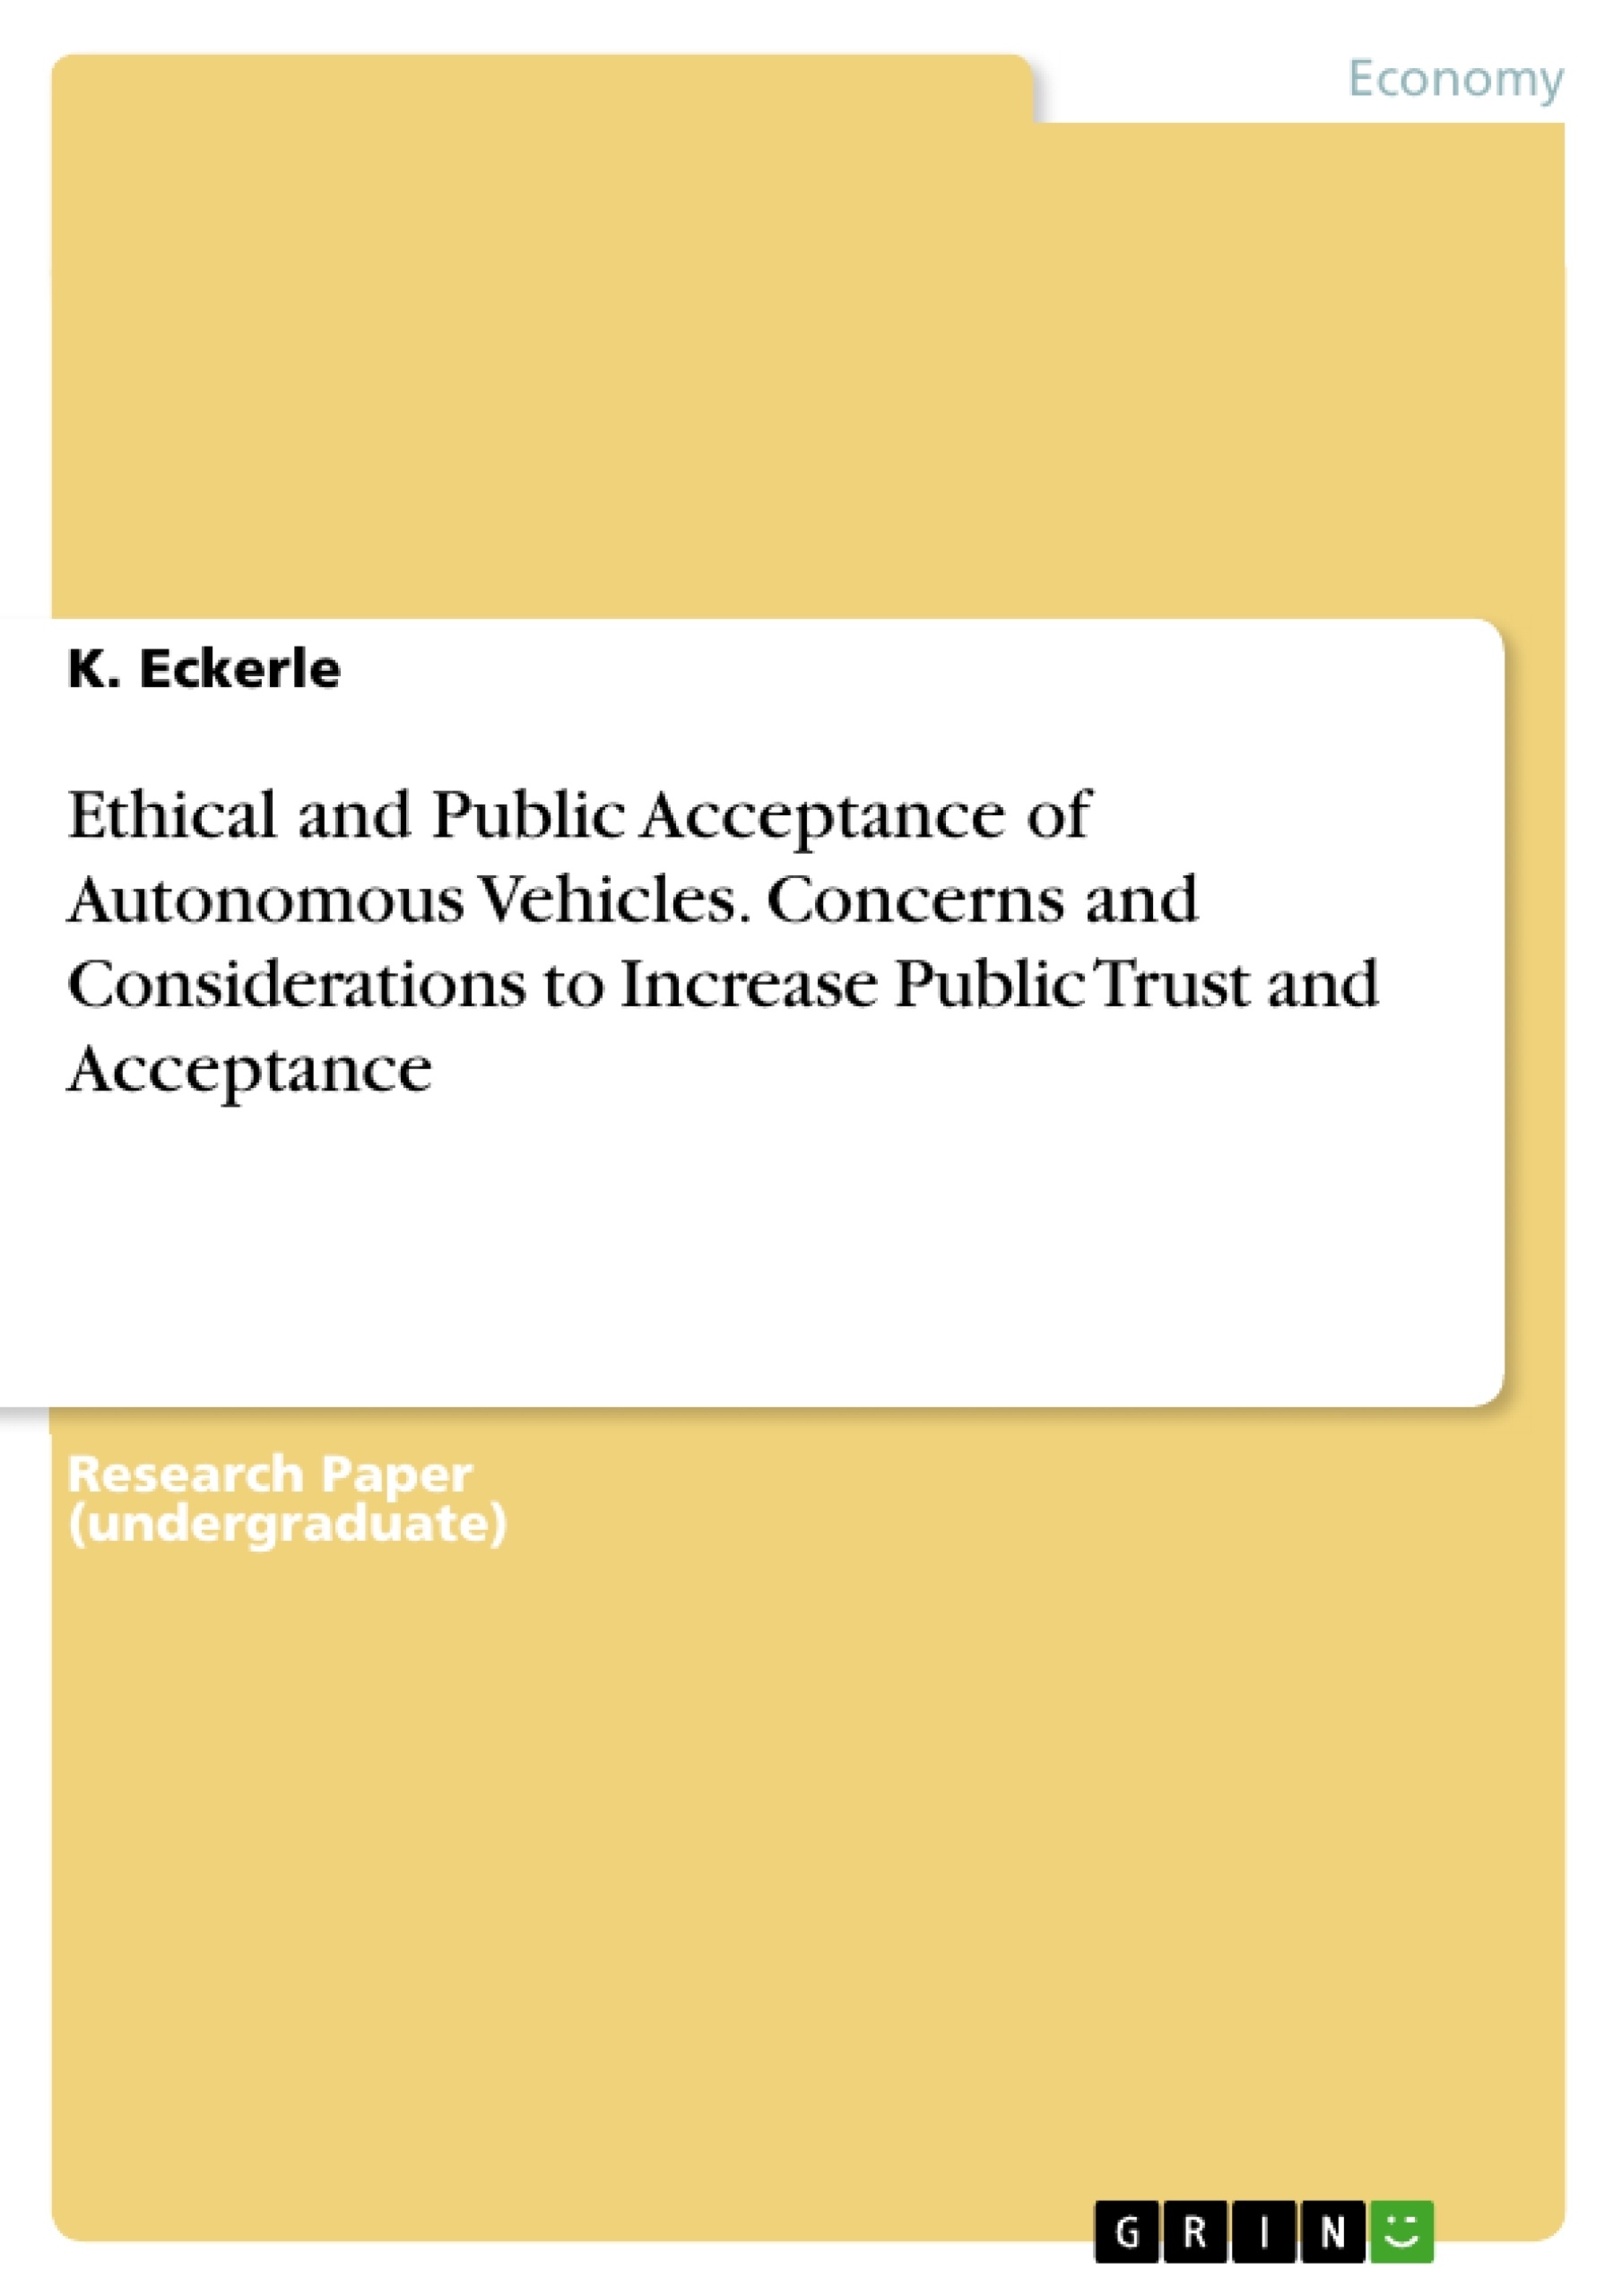 Title: Ethical and Public Acceptance of Autonomous Vehicles. Concerns and Considerations to Increase Public Trust and Acceptance